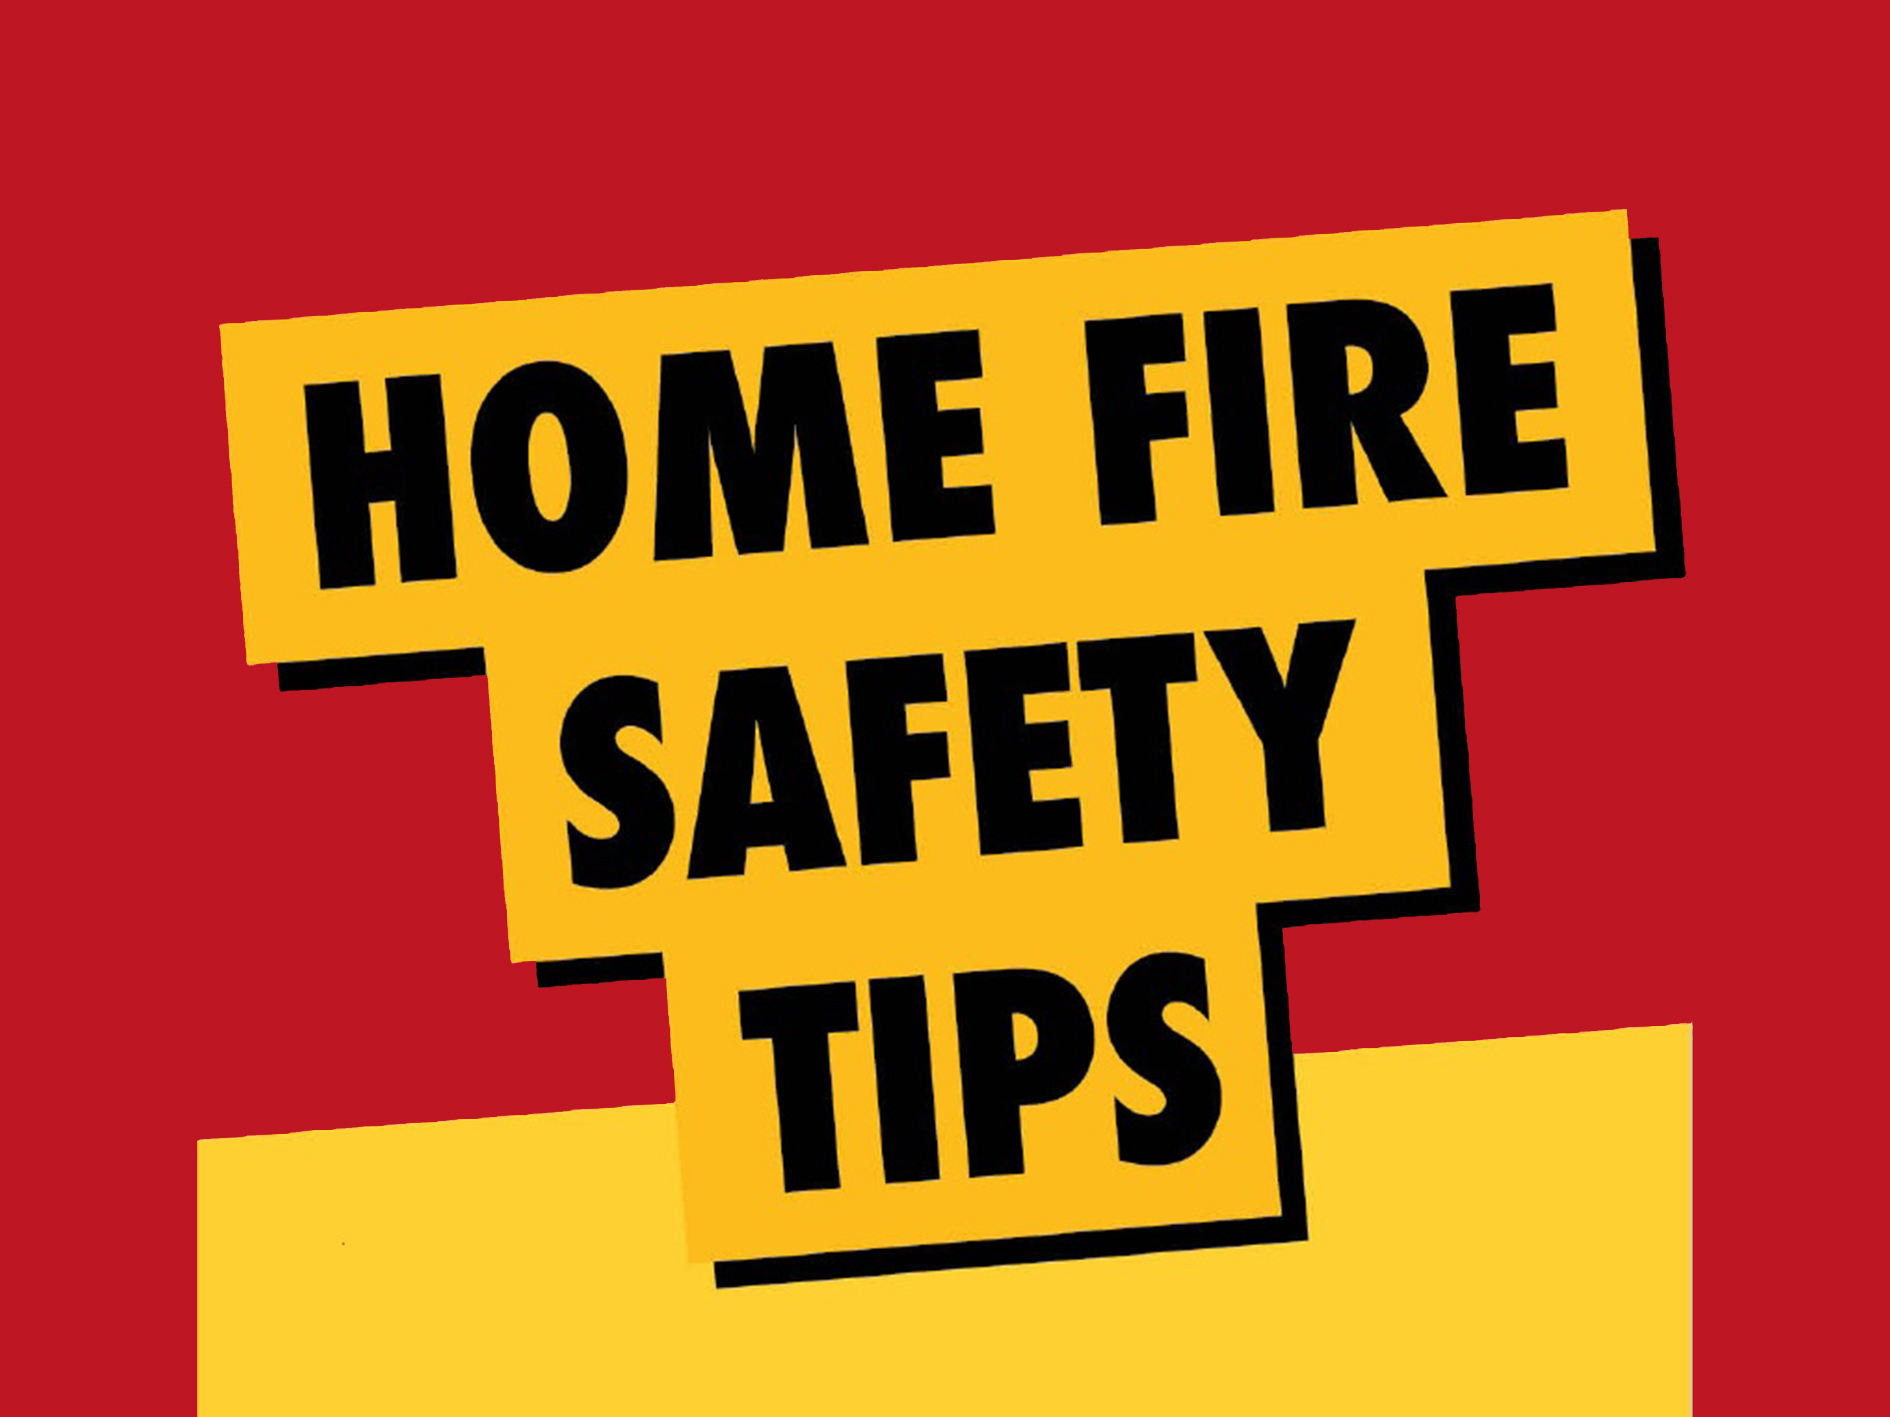 Section on Home Fire Safety tips